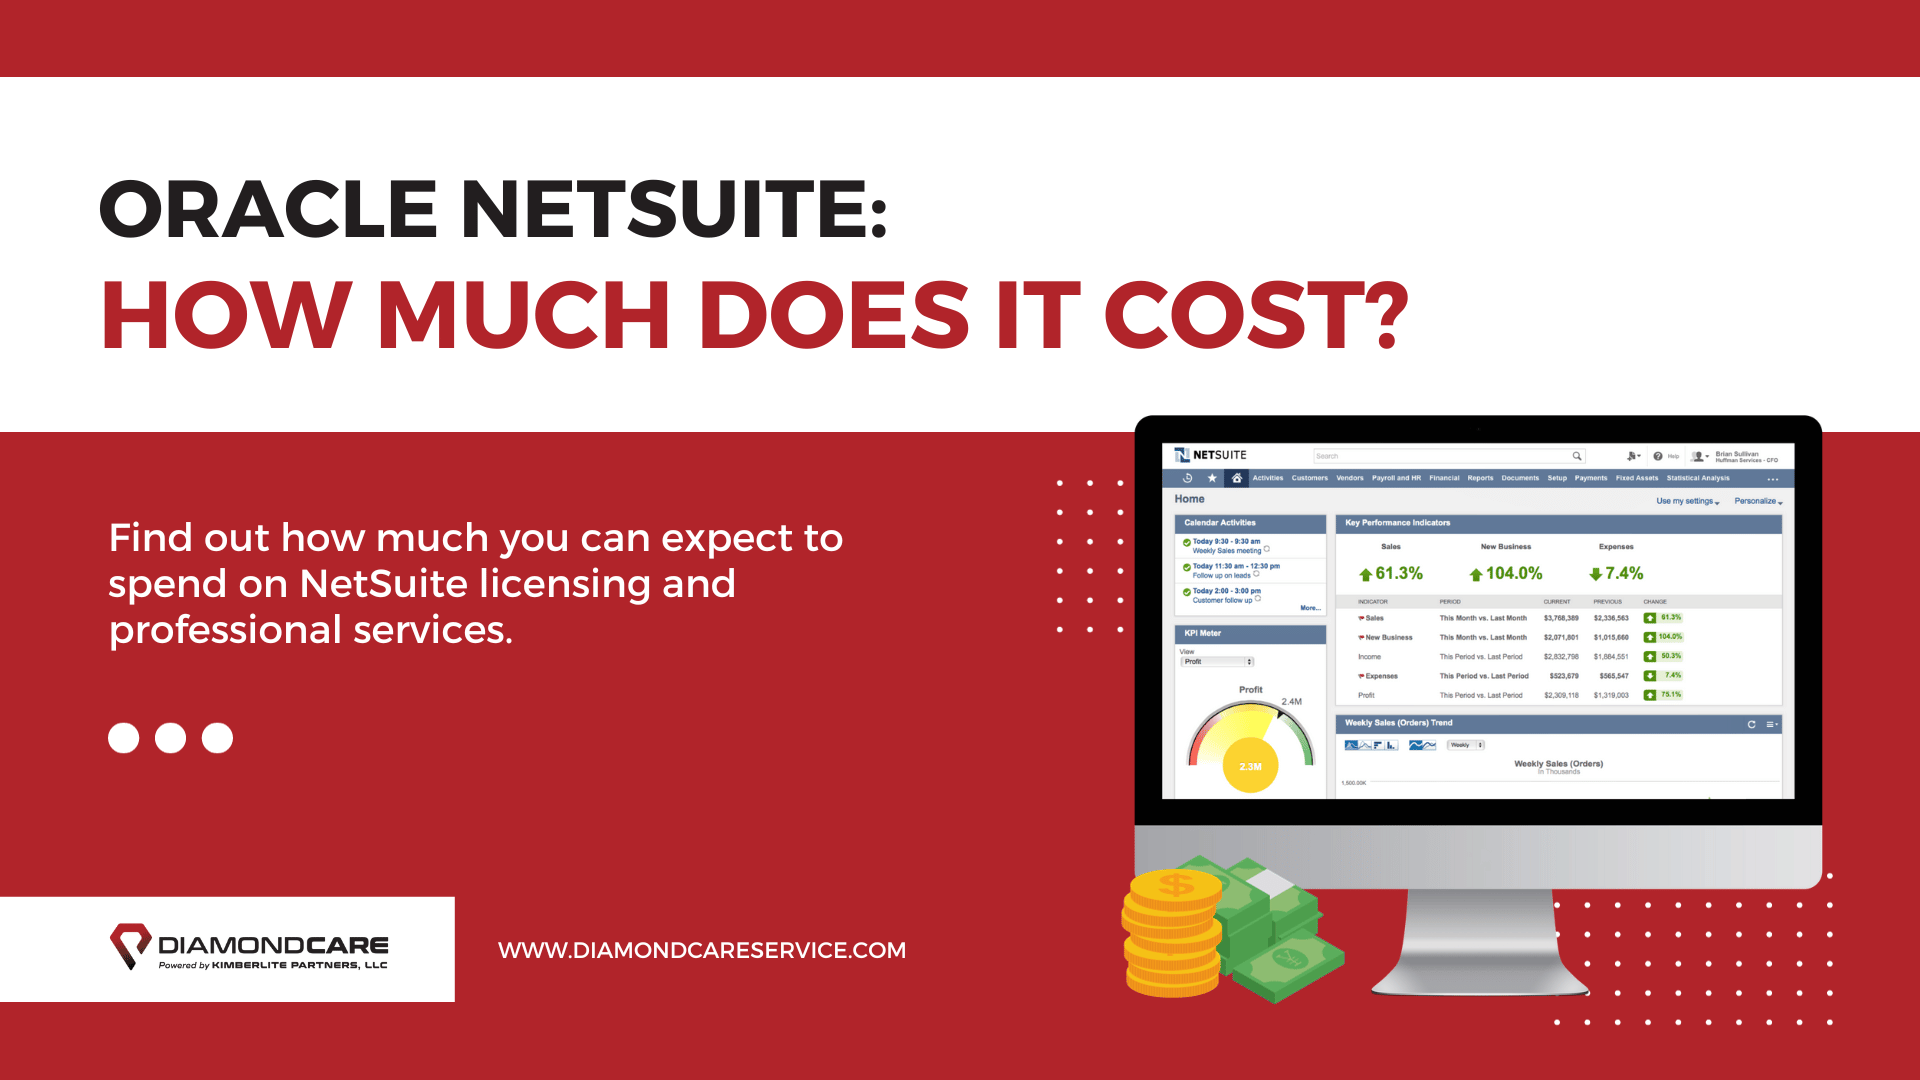 Understanding NetSuite Cost: How Much Does NetSuite Really Cost?